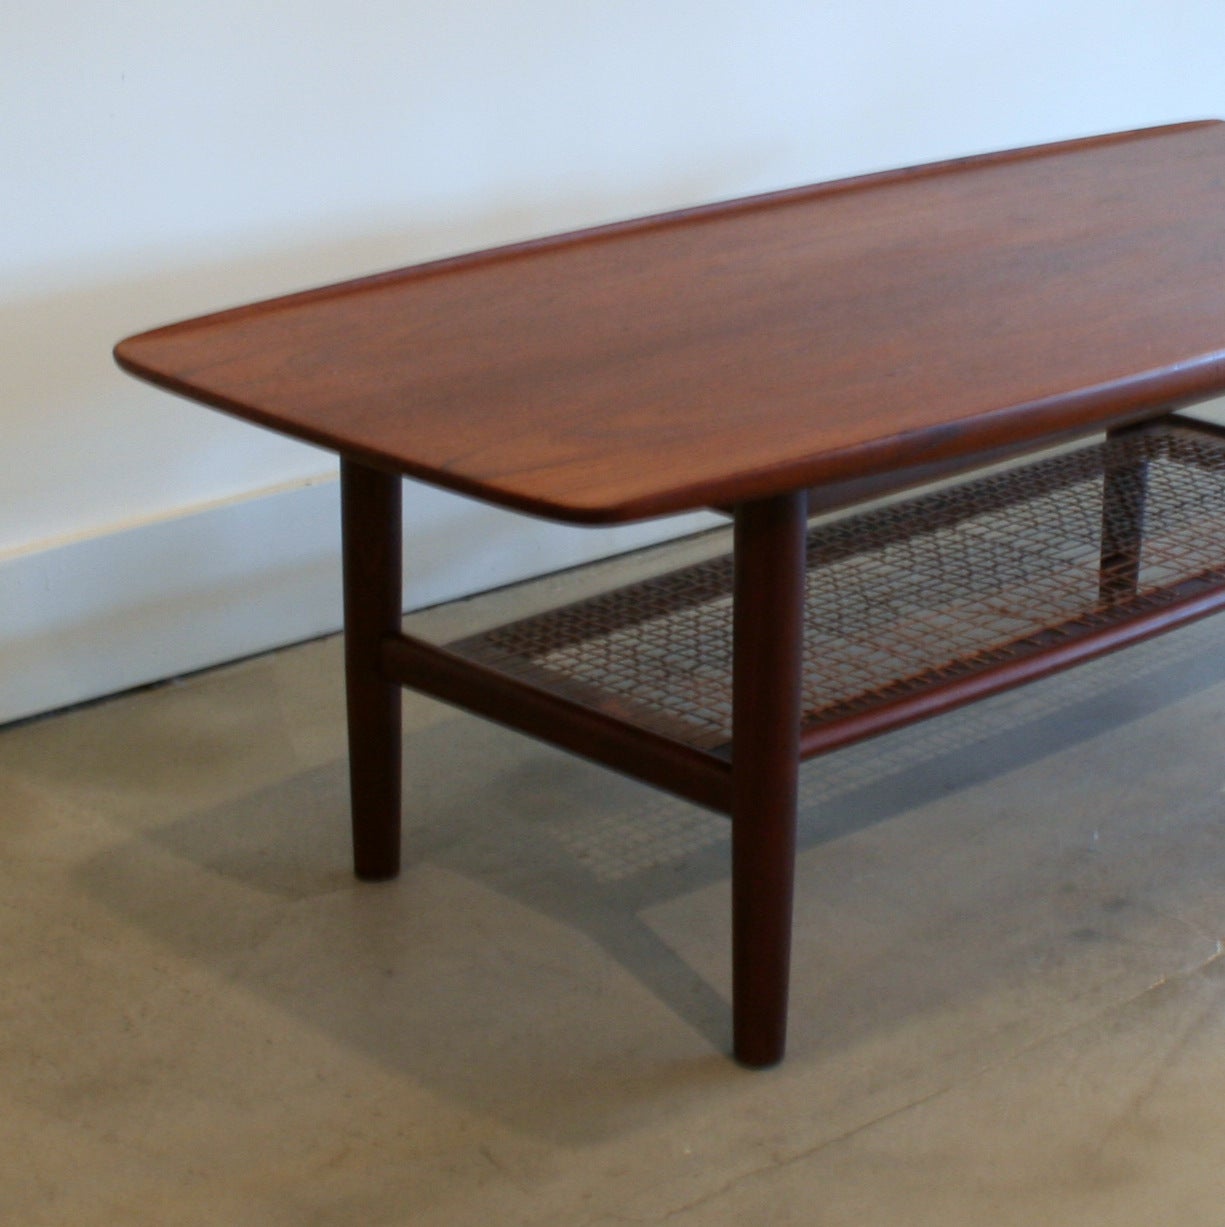 Beautiful vintage Danish coffee table with exquisite grains and colours. Subtle surfboard shape and lip sides to the top with a sturdy feel that contrasts nicely with the cane detail.